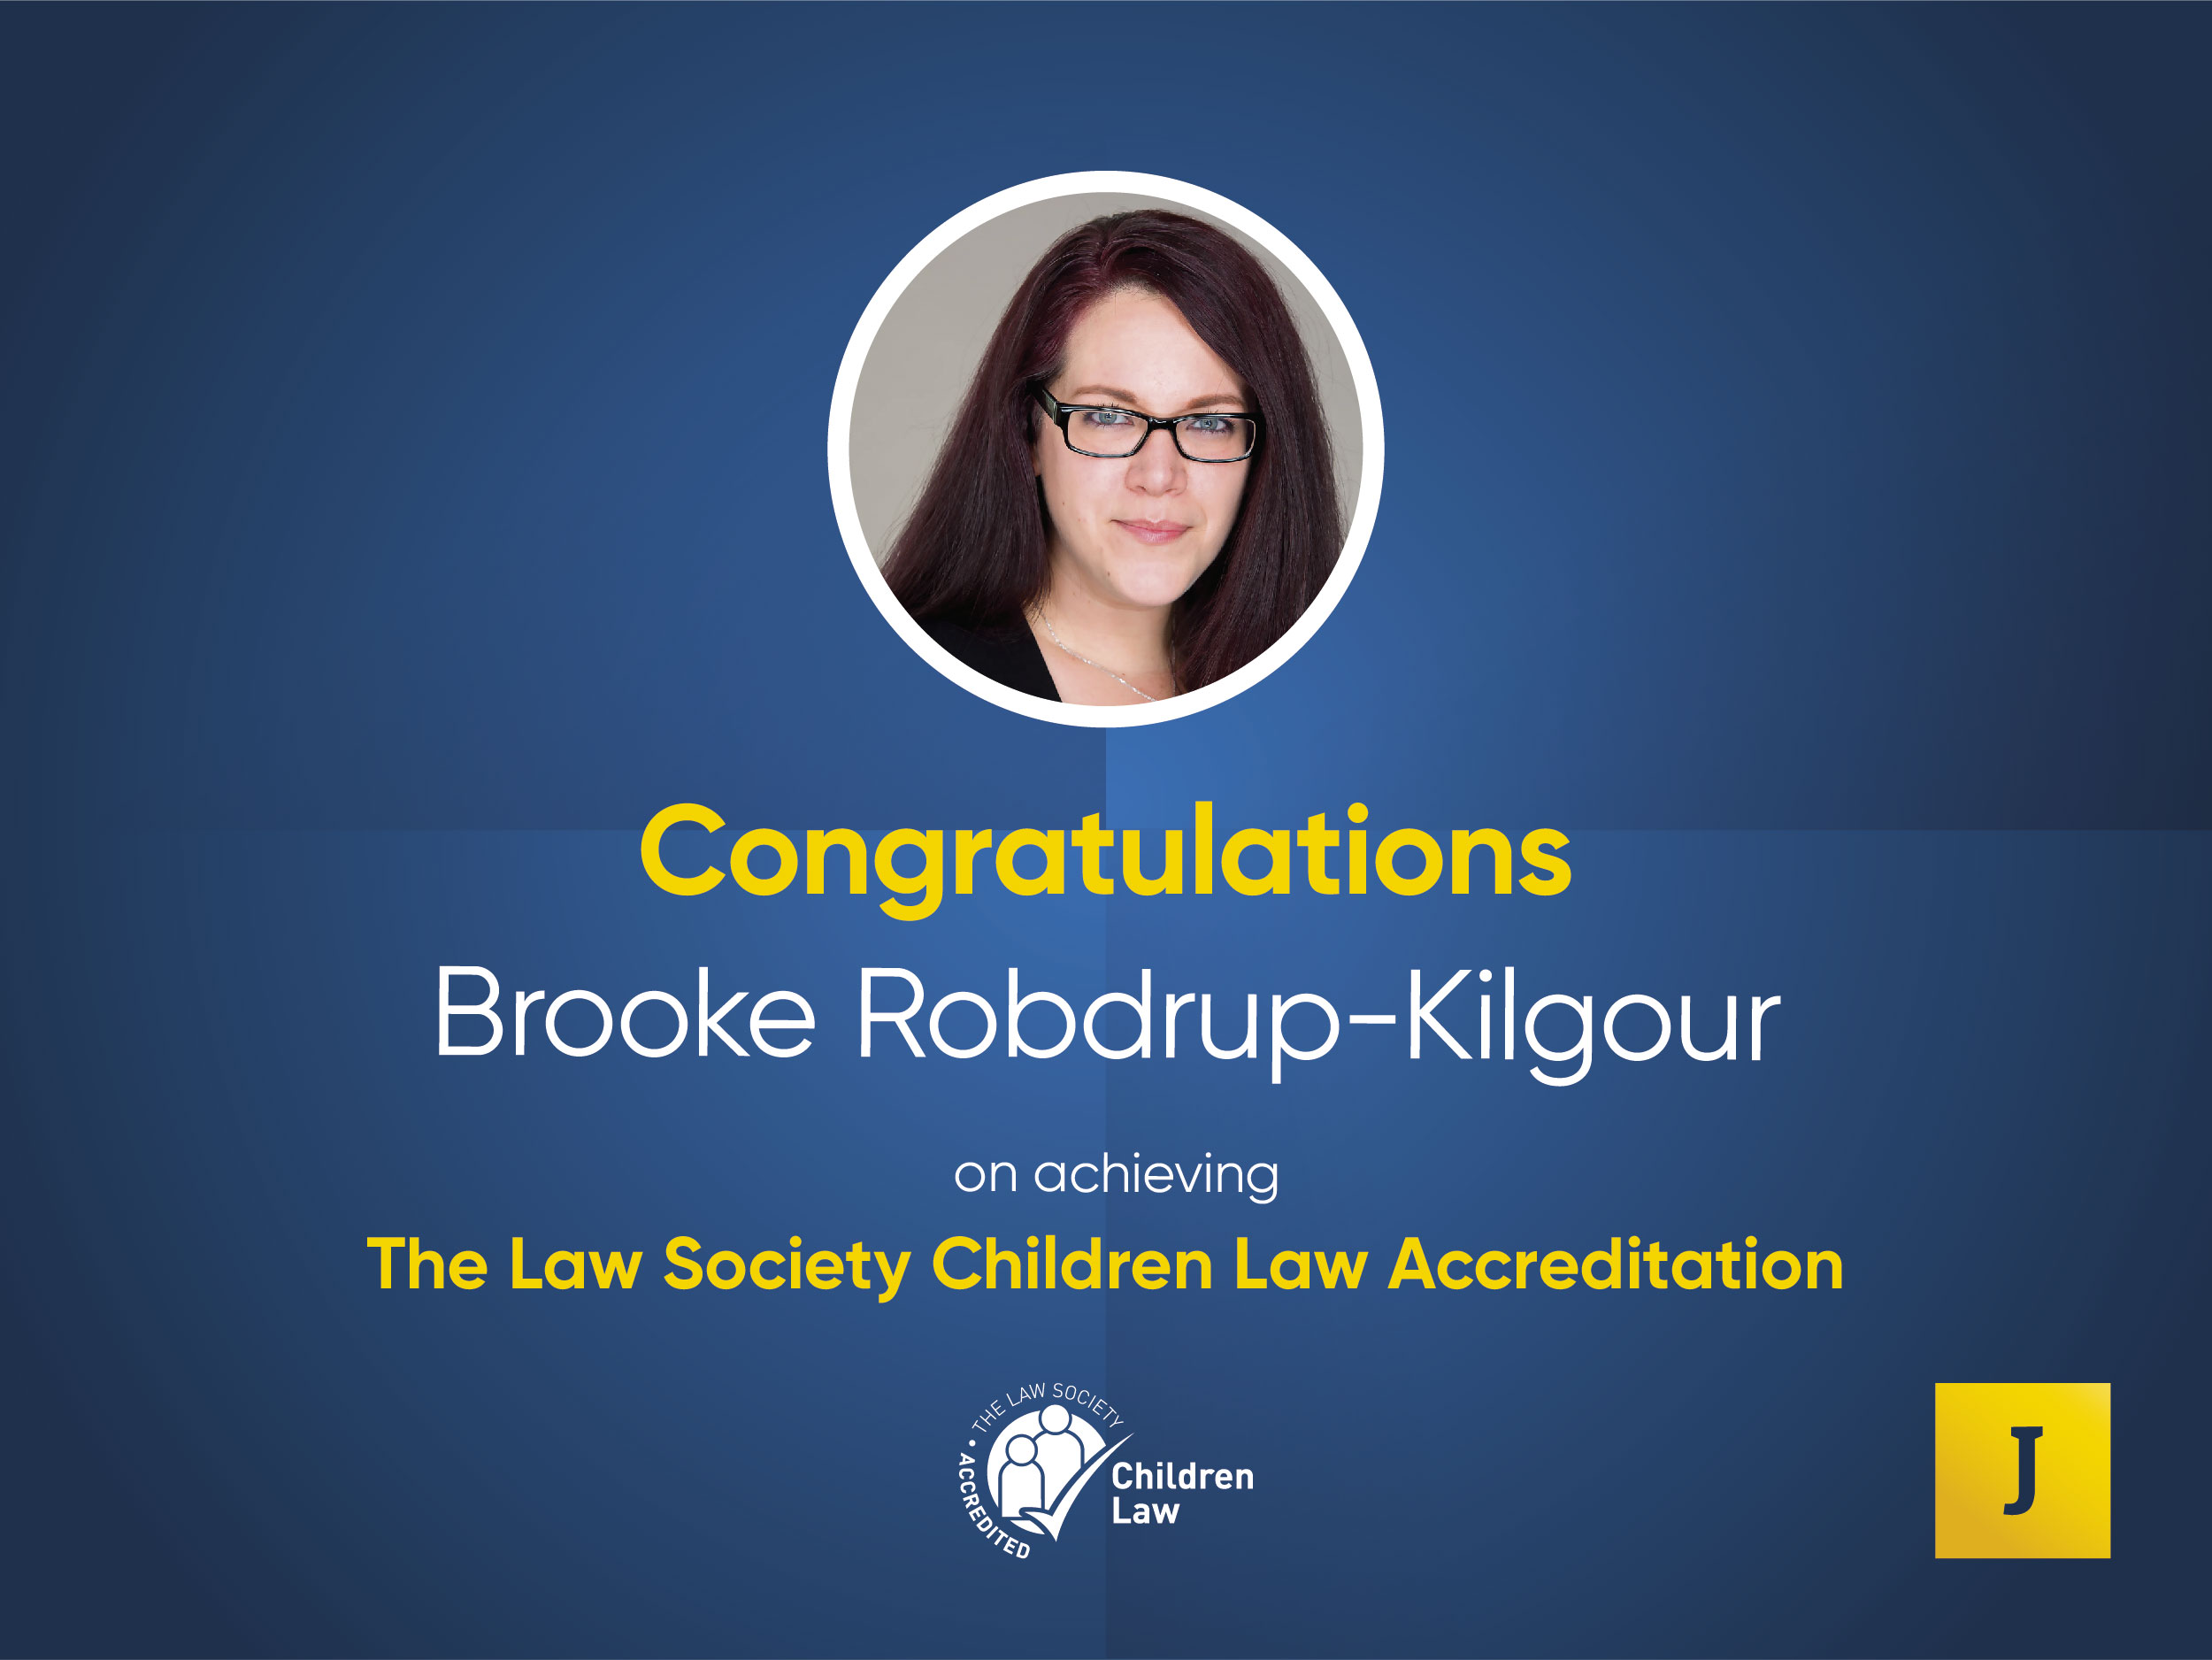 Jefferies Law Southend Congratulations Brooke Robdrup-Kilgour on The Law Society Children Law Accreditation